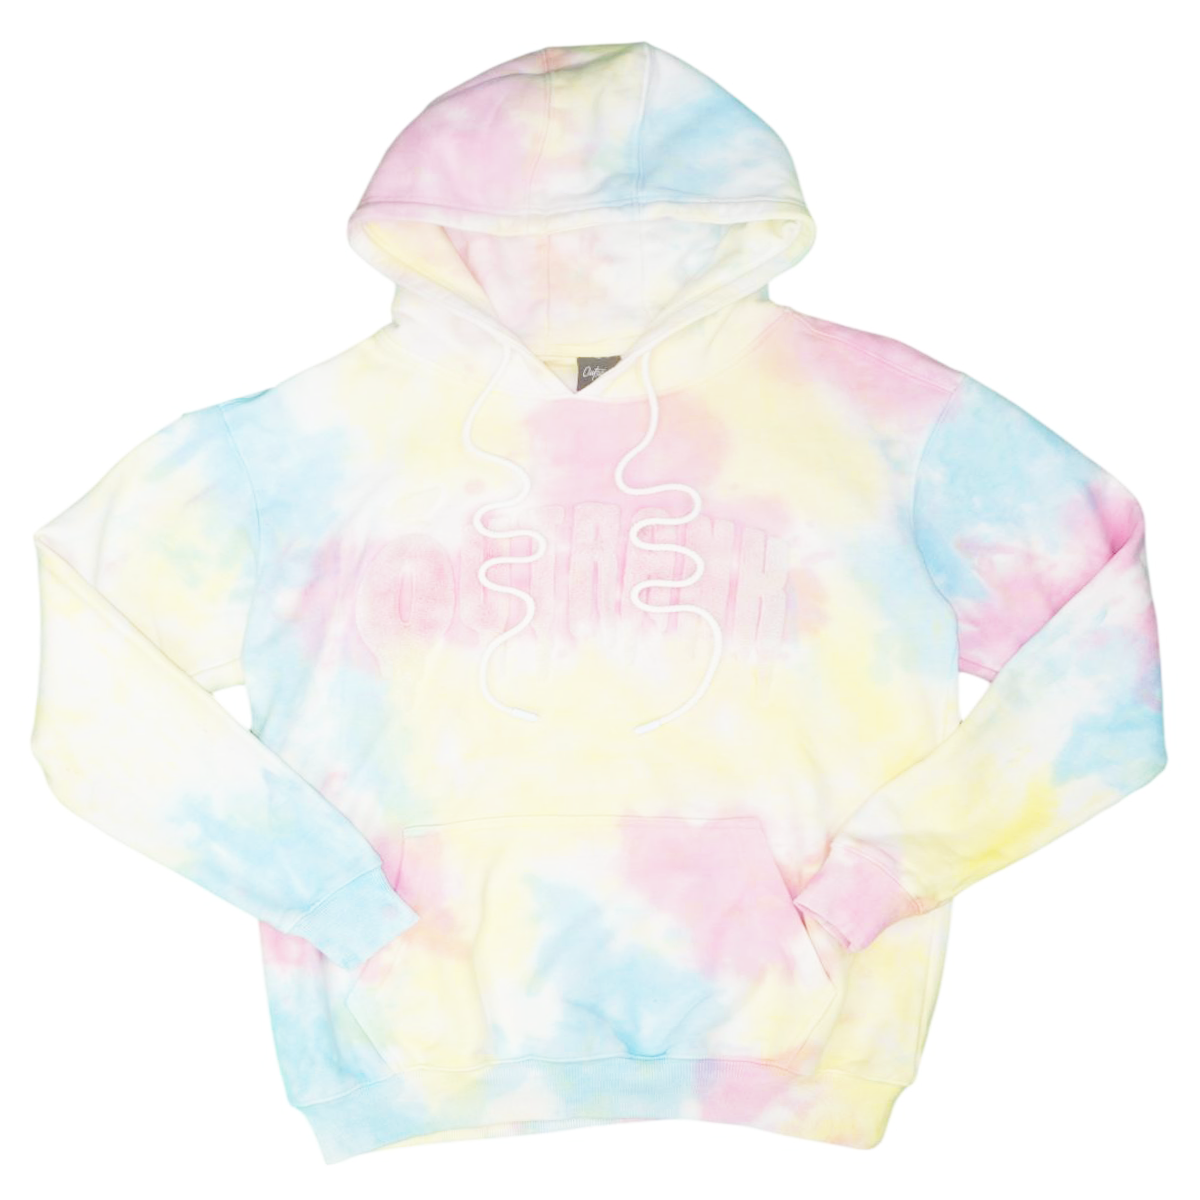 Blue Chee$e French Terry Tie Dye Hoodie (Pink/Yllw/Blu) /D18